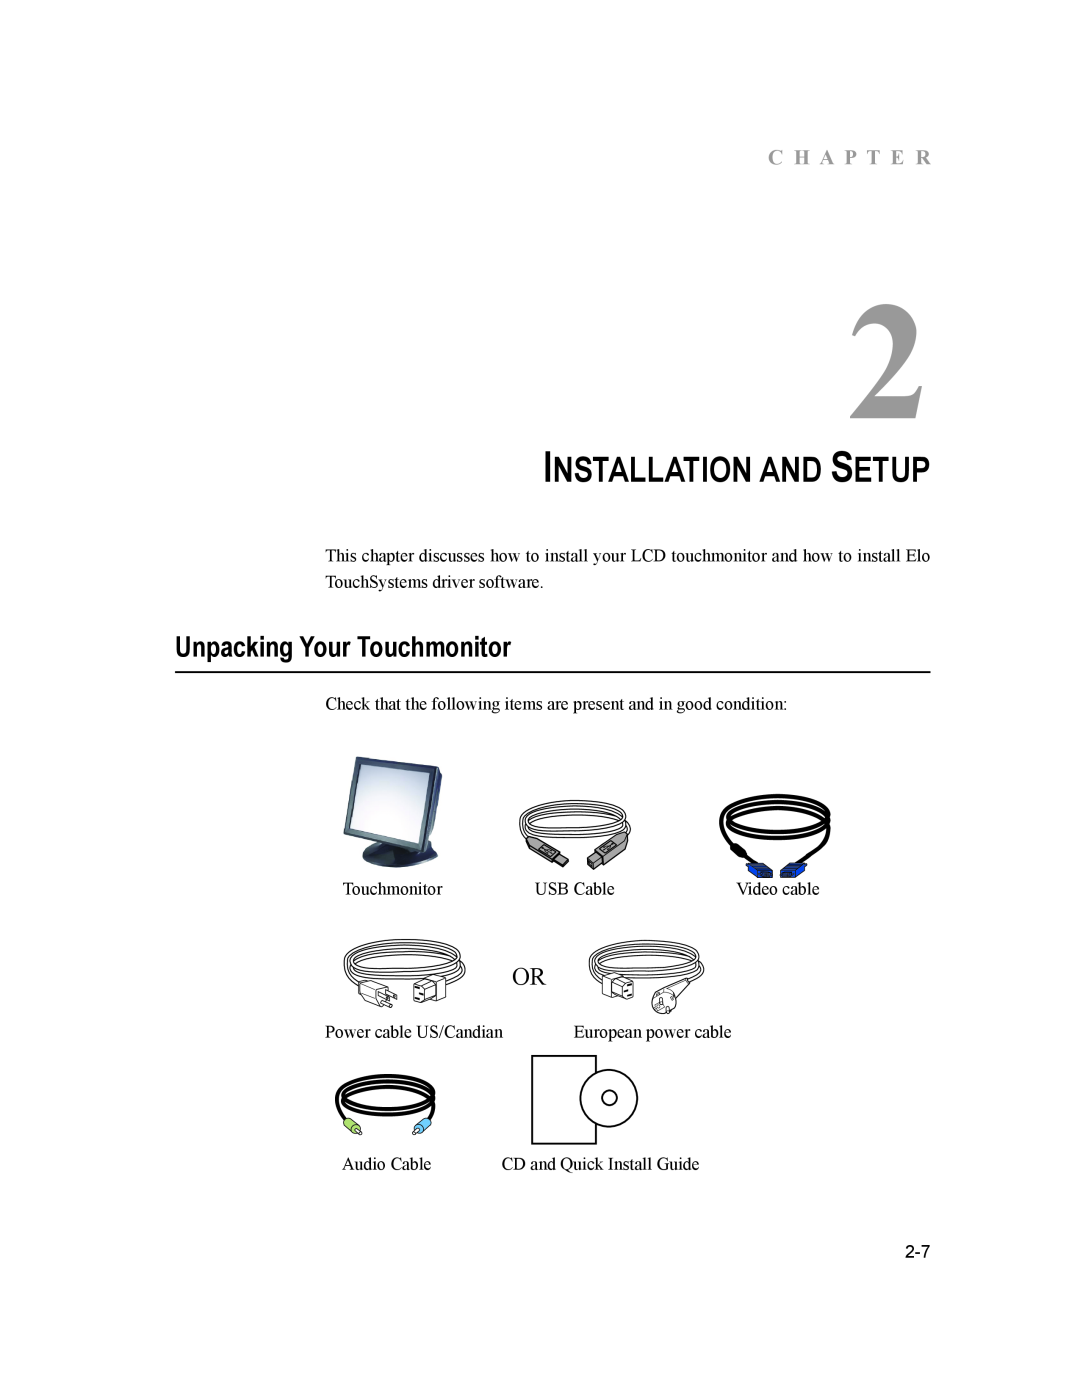 Elo TouchSystems 1729L manual Installation And Setup, Unpacking Your Touchmonitor, C H A P T E R 